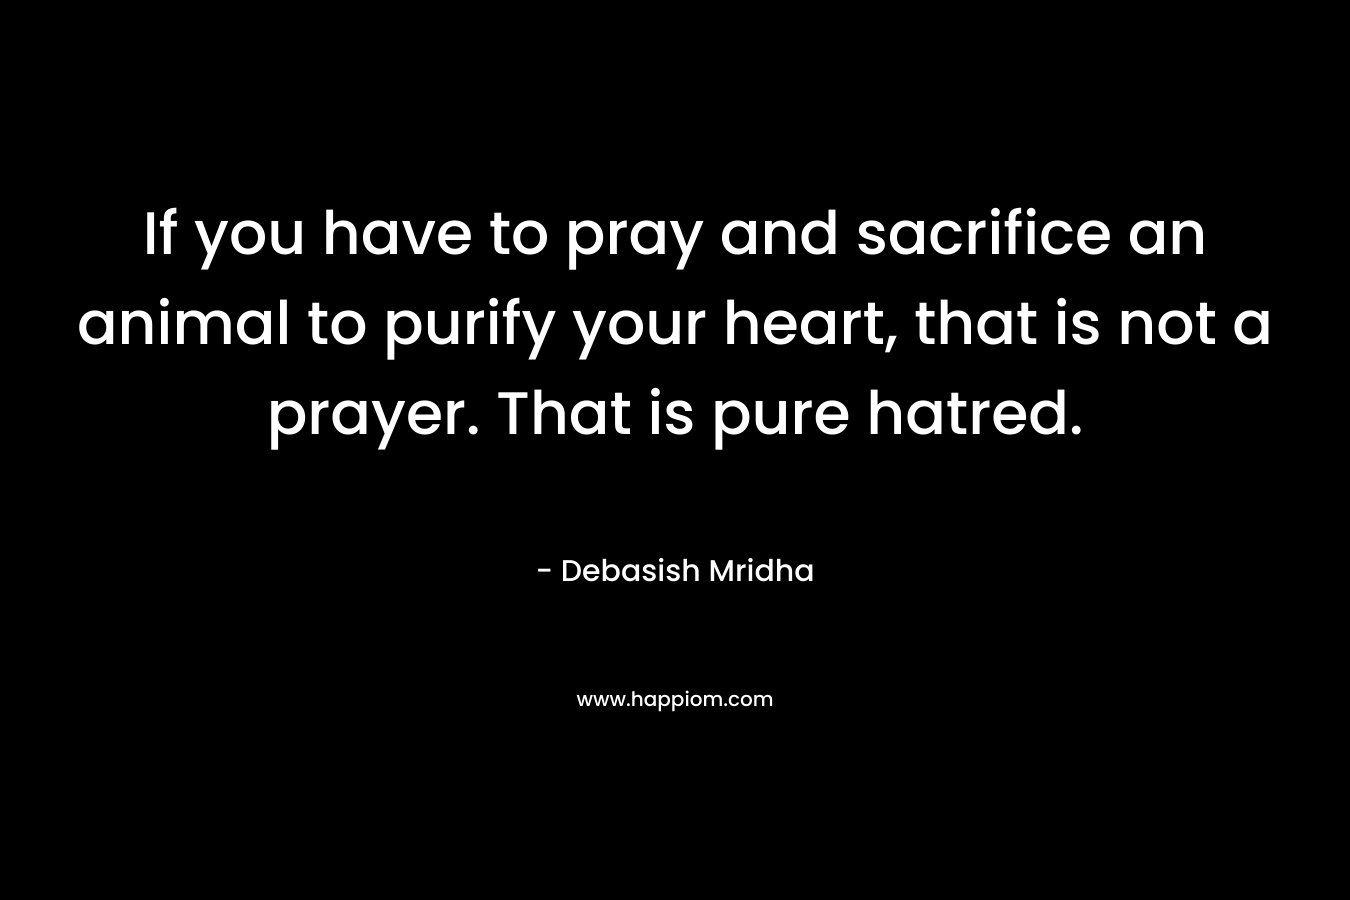 If you have to pray and sacrifice an animal to purify your heart, that is not a prayer. That is pure hatred.